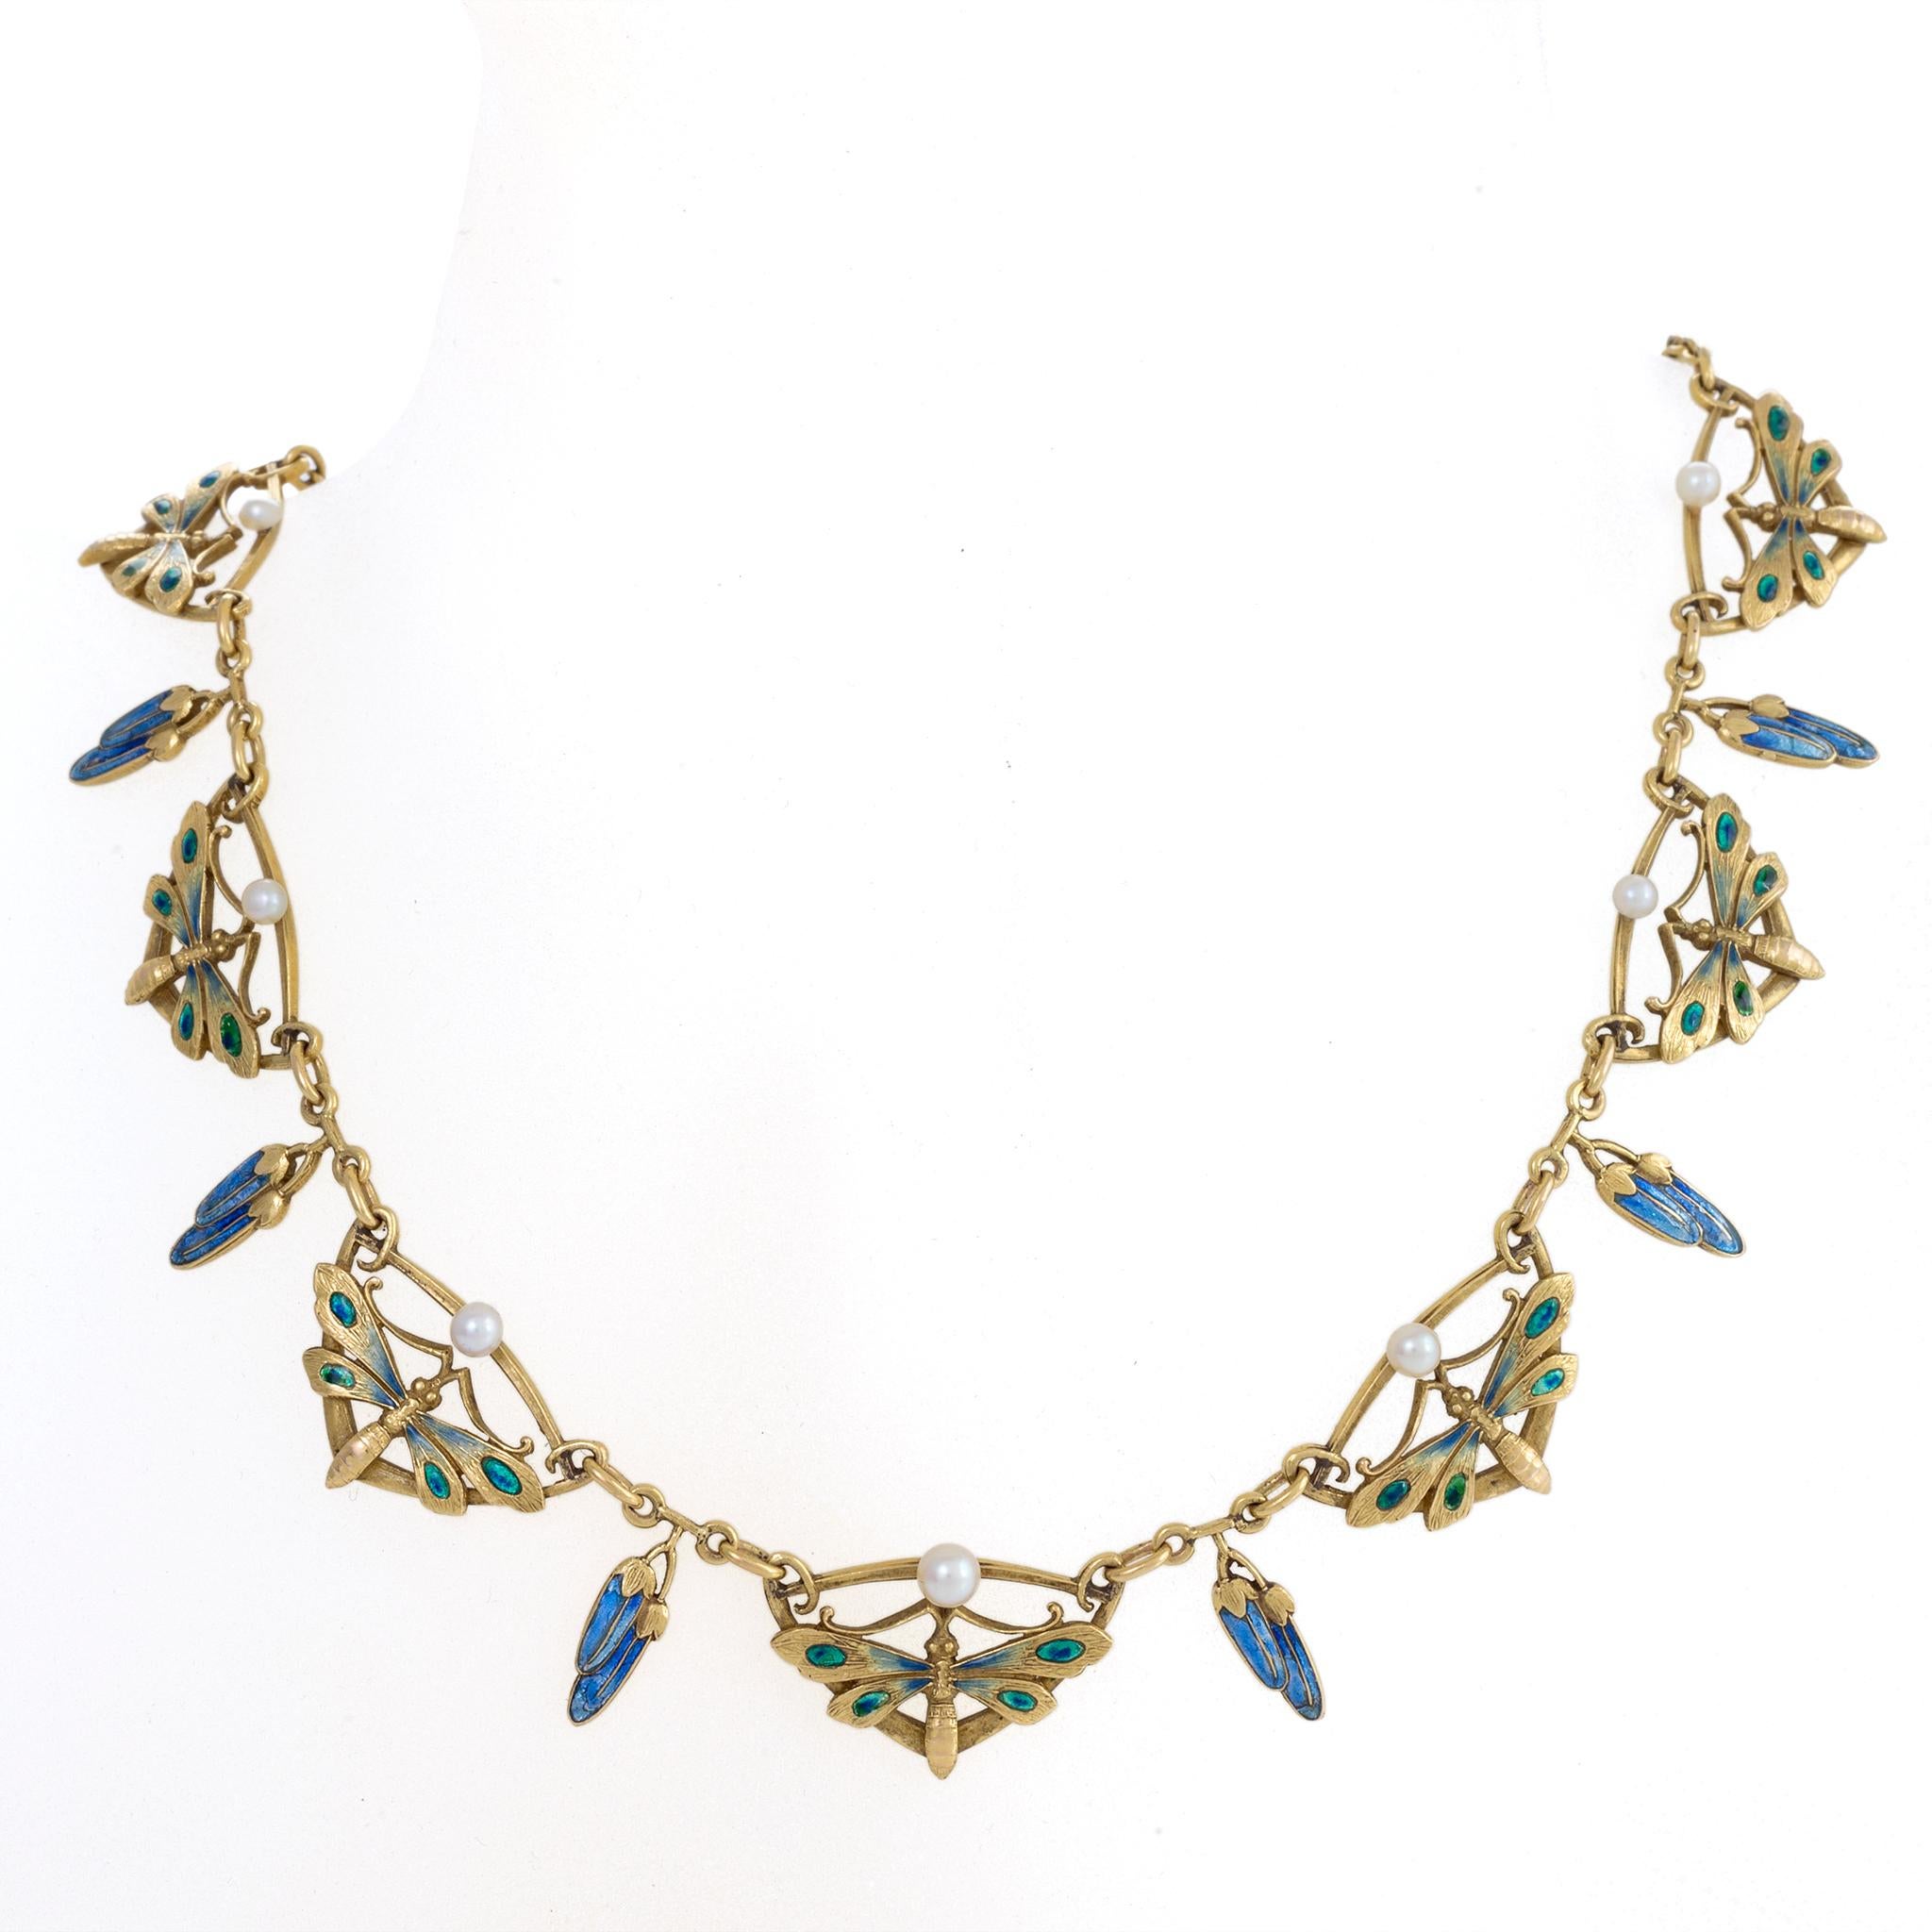 Created around 1900, this Art Nouveau necklace is composed of gold, enamel, and seed pearls. With chased and engraved gold surfaces, the seven green and blue enamel butterflies are interspersed with double blue enamel pendant flower buds and